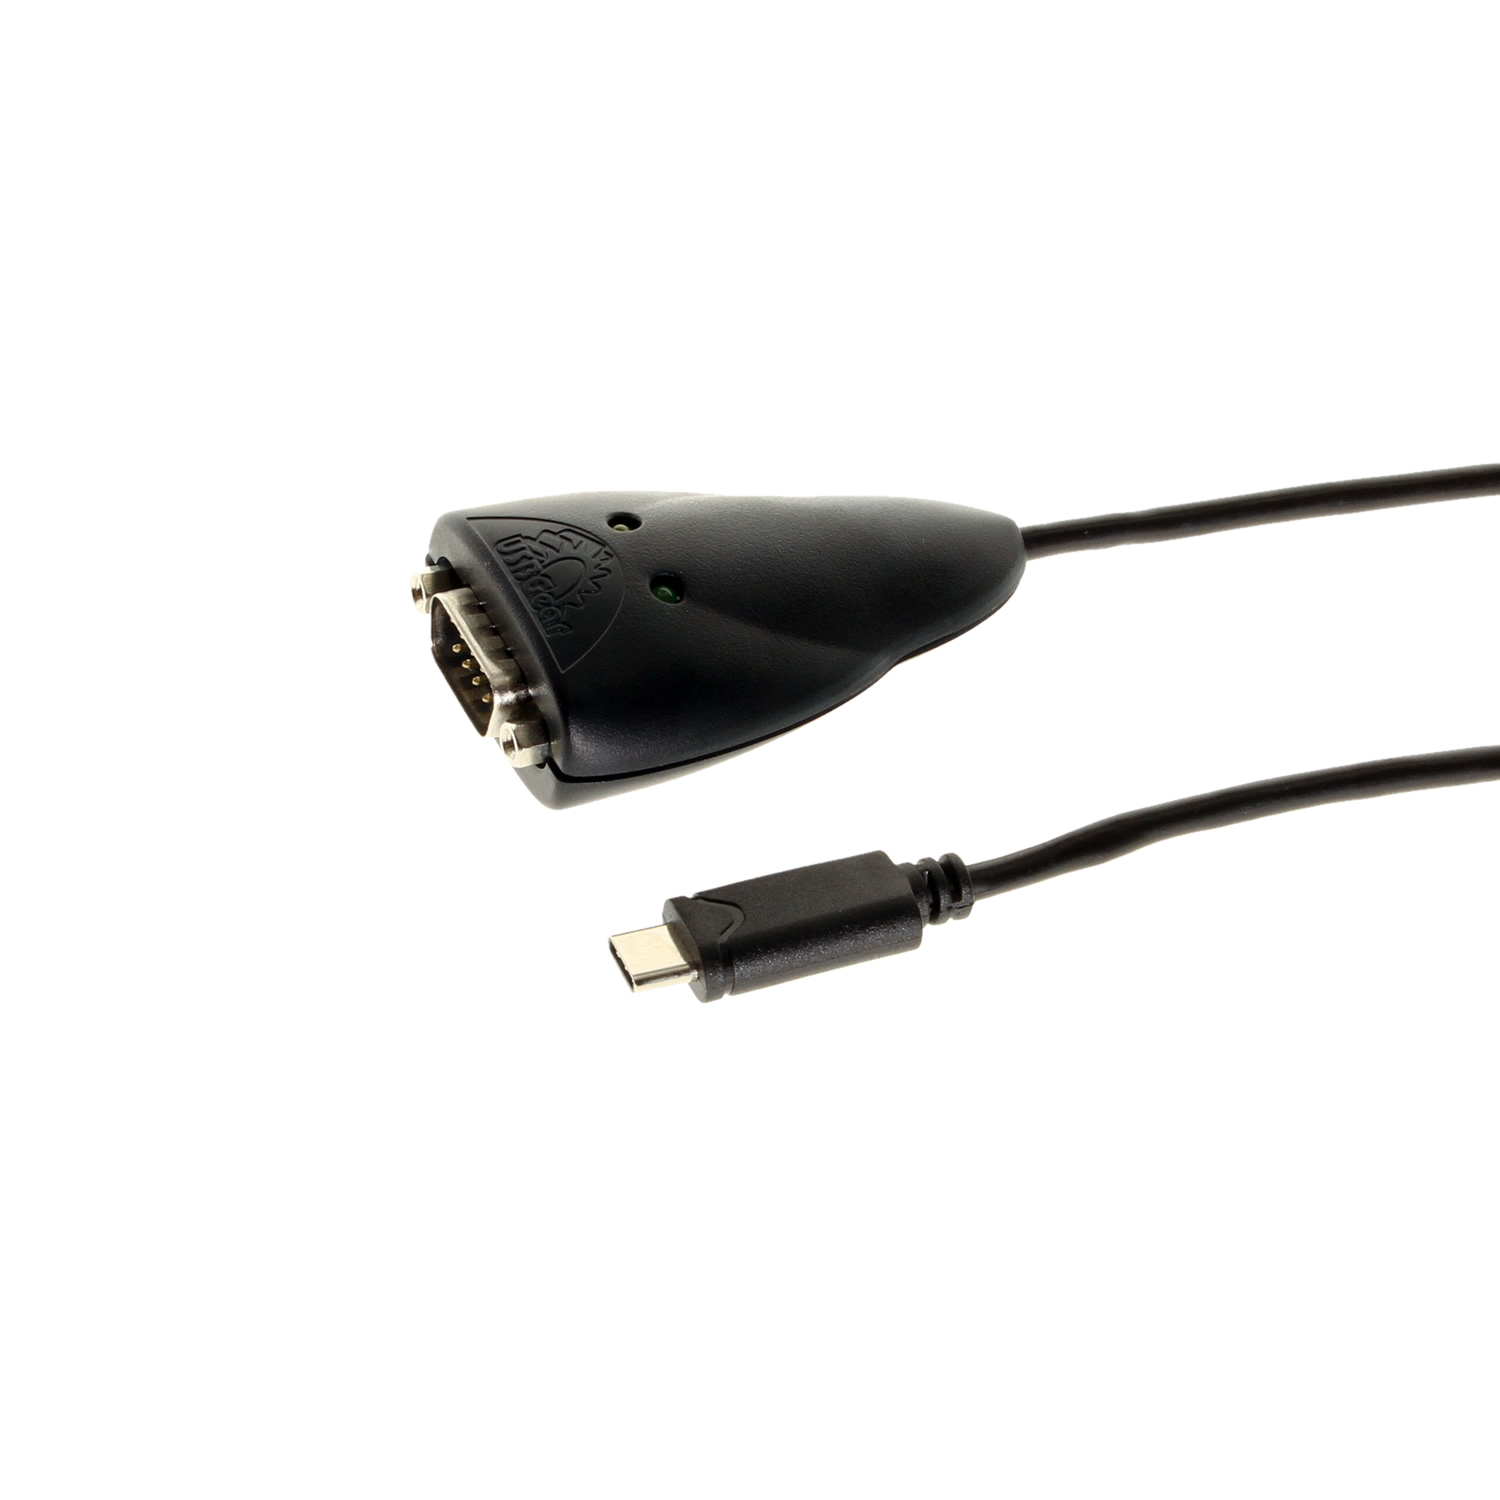 Profit lindring Dømme USB C to Serial FTDI Adapter Black for Windows 10 Fully Supported! -  Coolgear